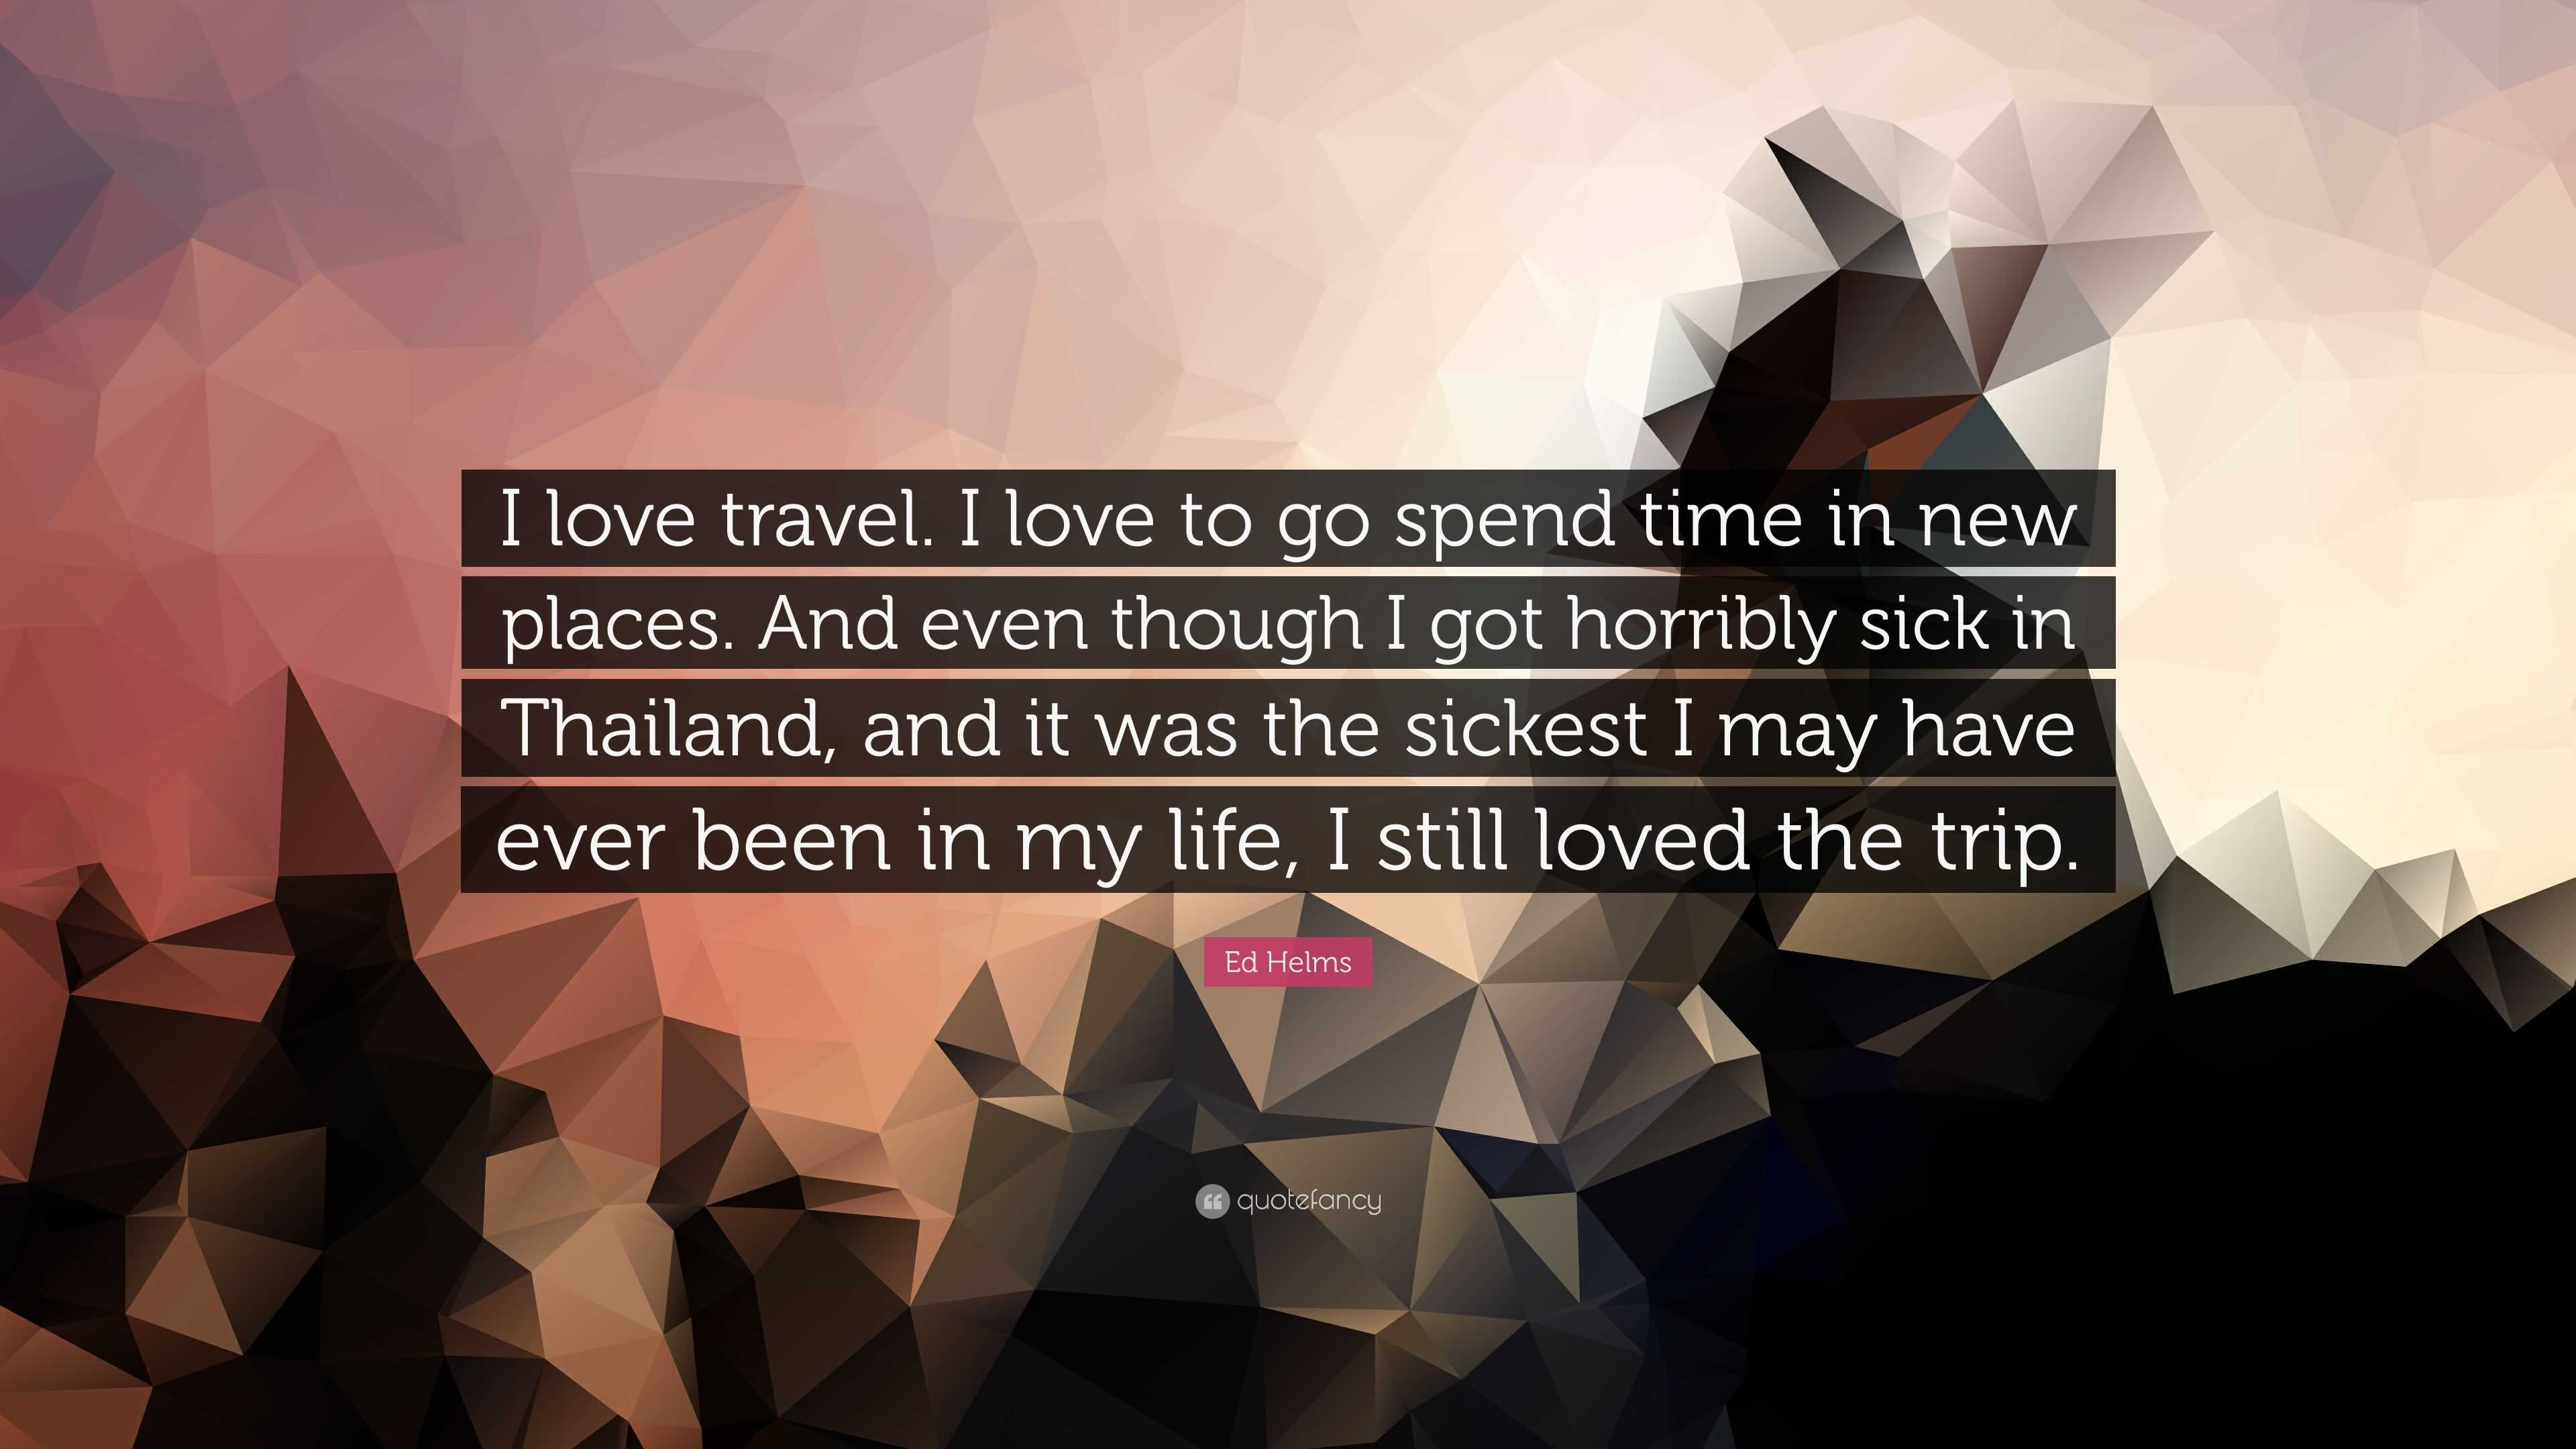 Ed Helms Quote: “I love travel. I love to go spend time in new places. And  even though I got horribly sick in Thailand, and it was the si...”